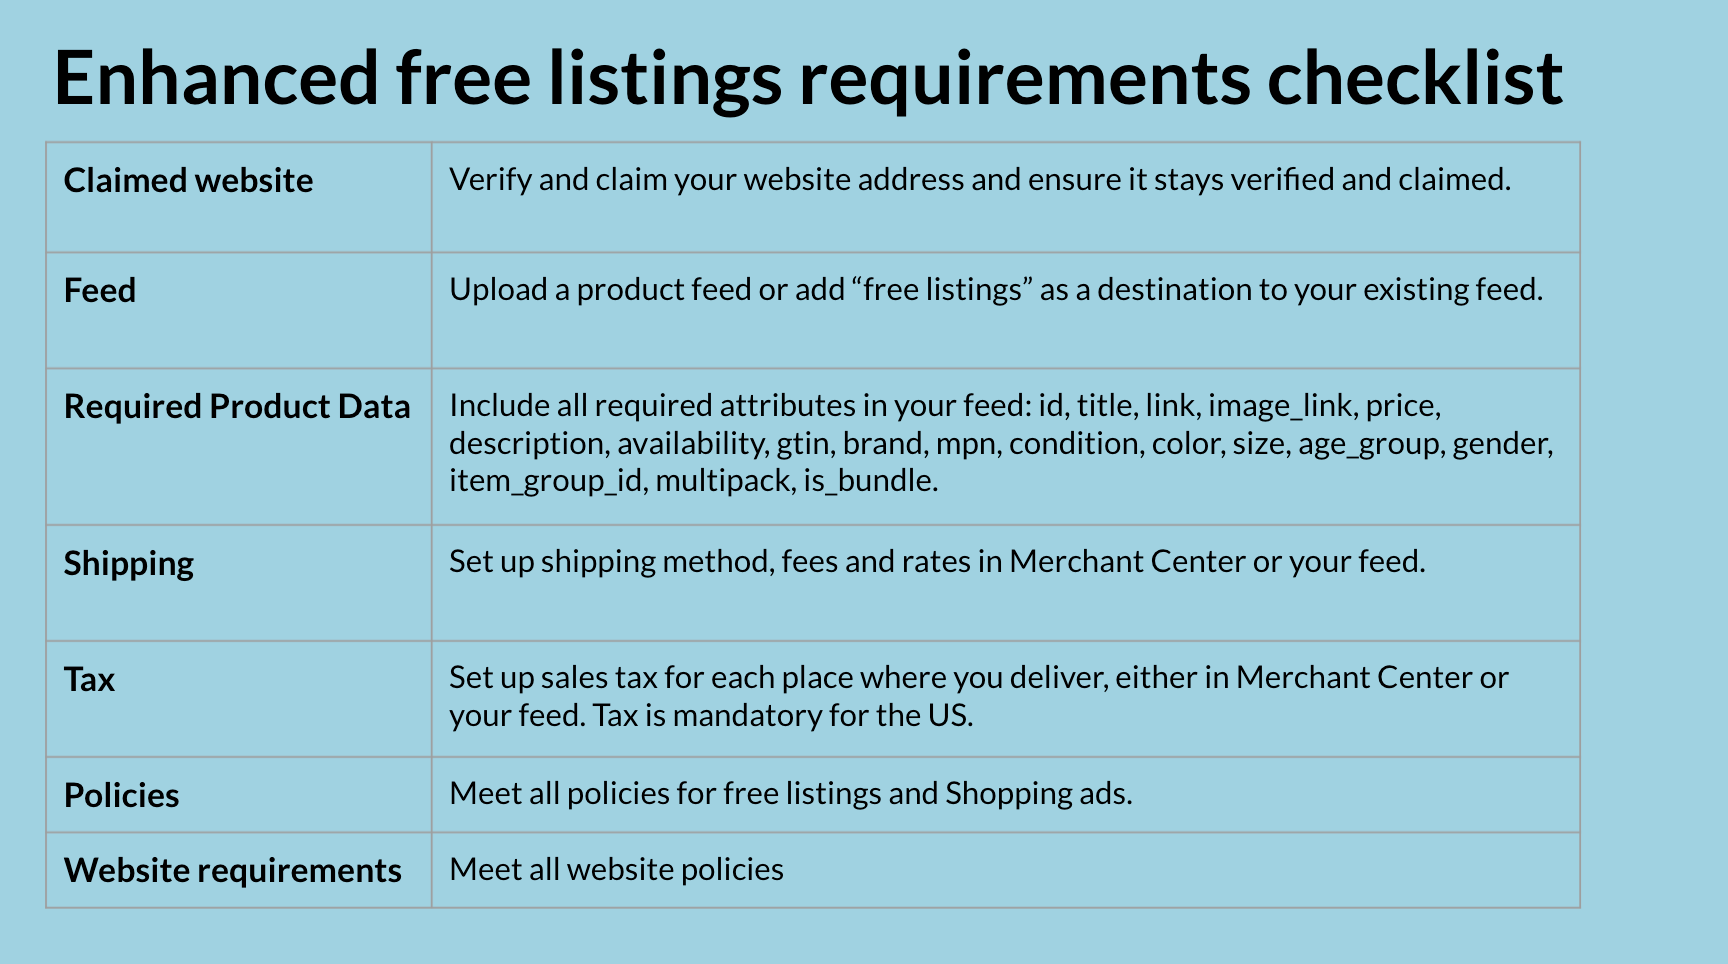 How To Fix Ineligible For Enhanced Free Listings Issues in Merchant Center